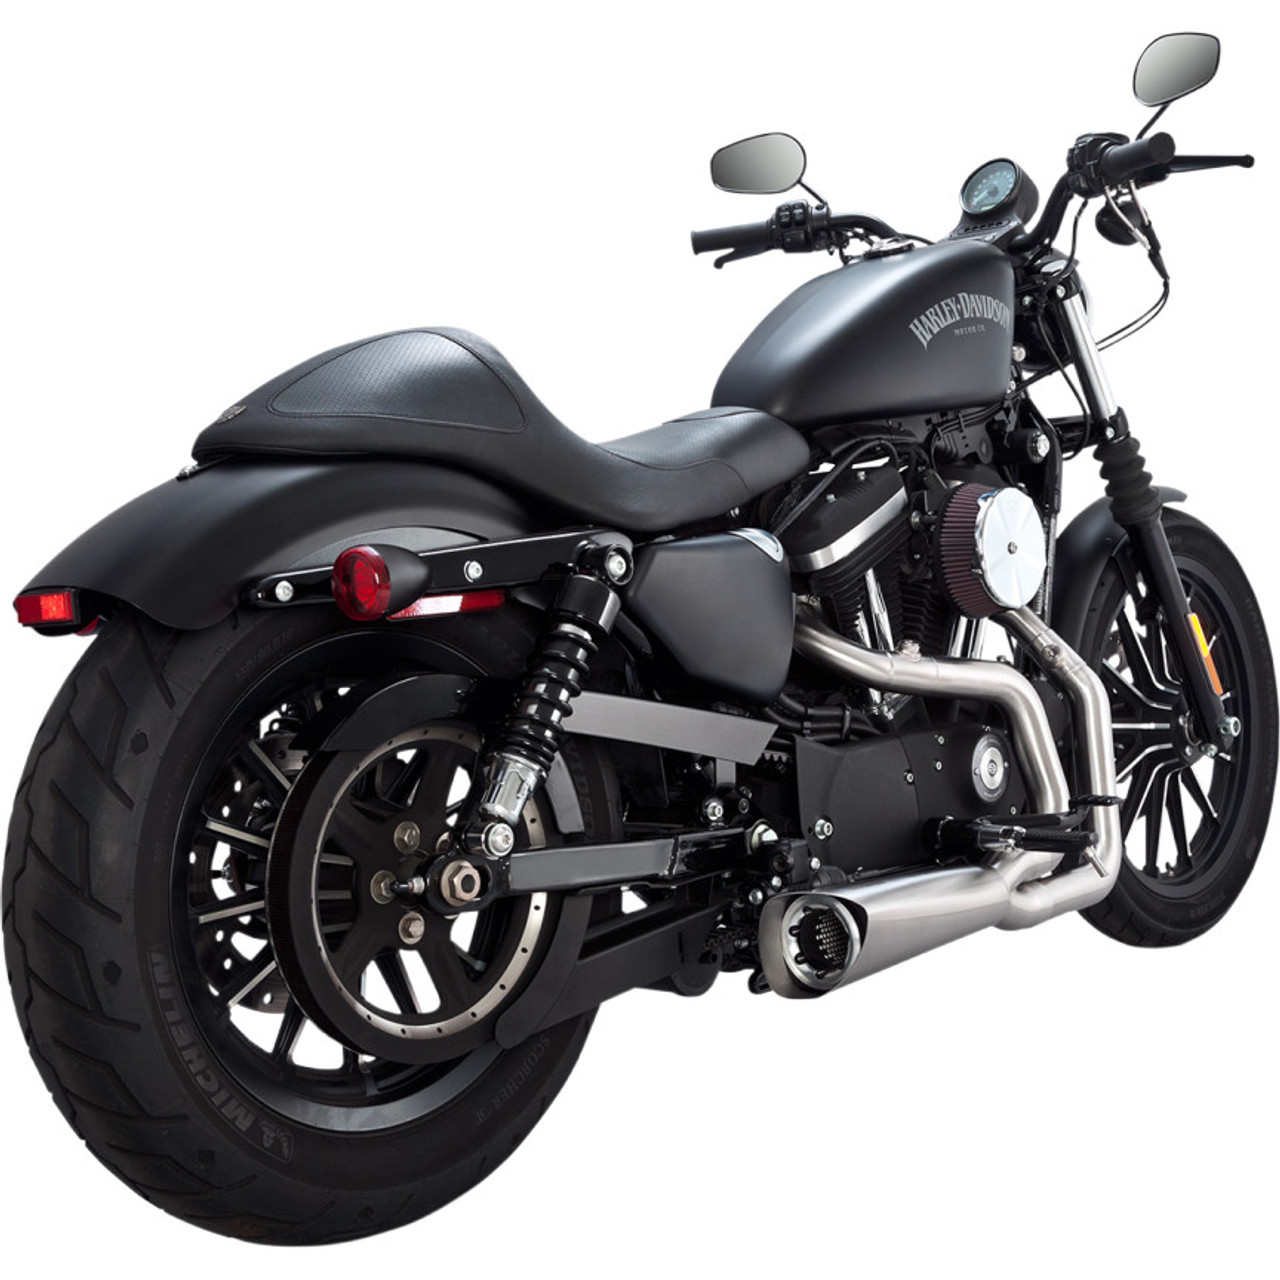 Vance & Hines Competition Series 2-Into-1 Exhaust for 2014 Harley